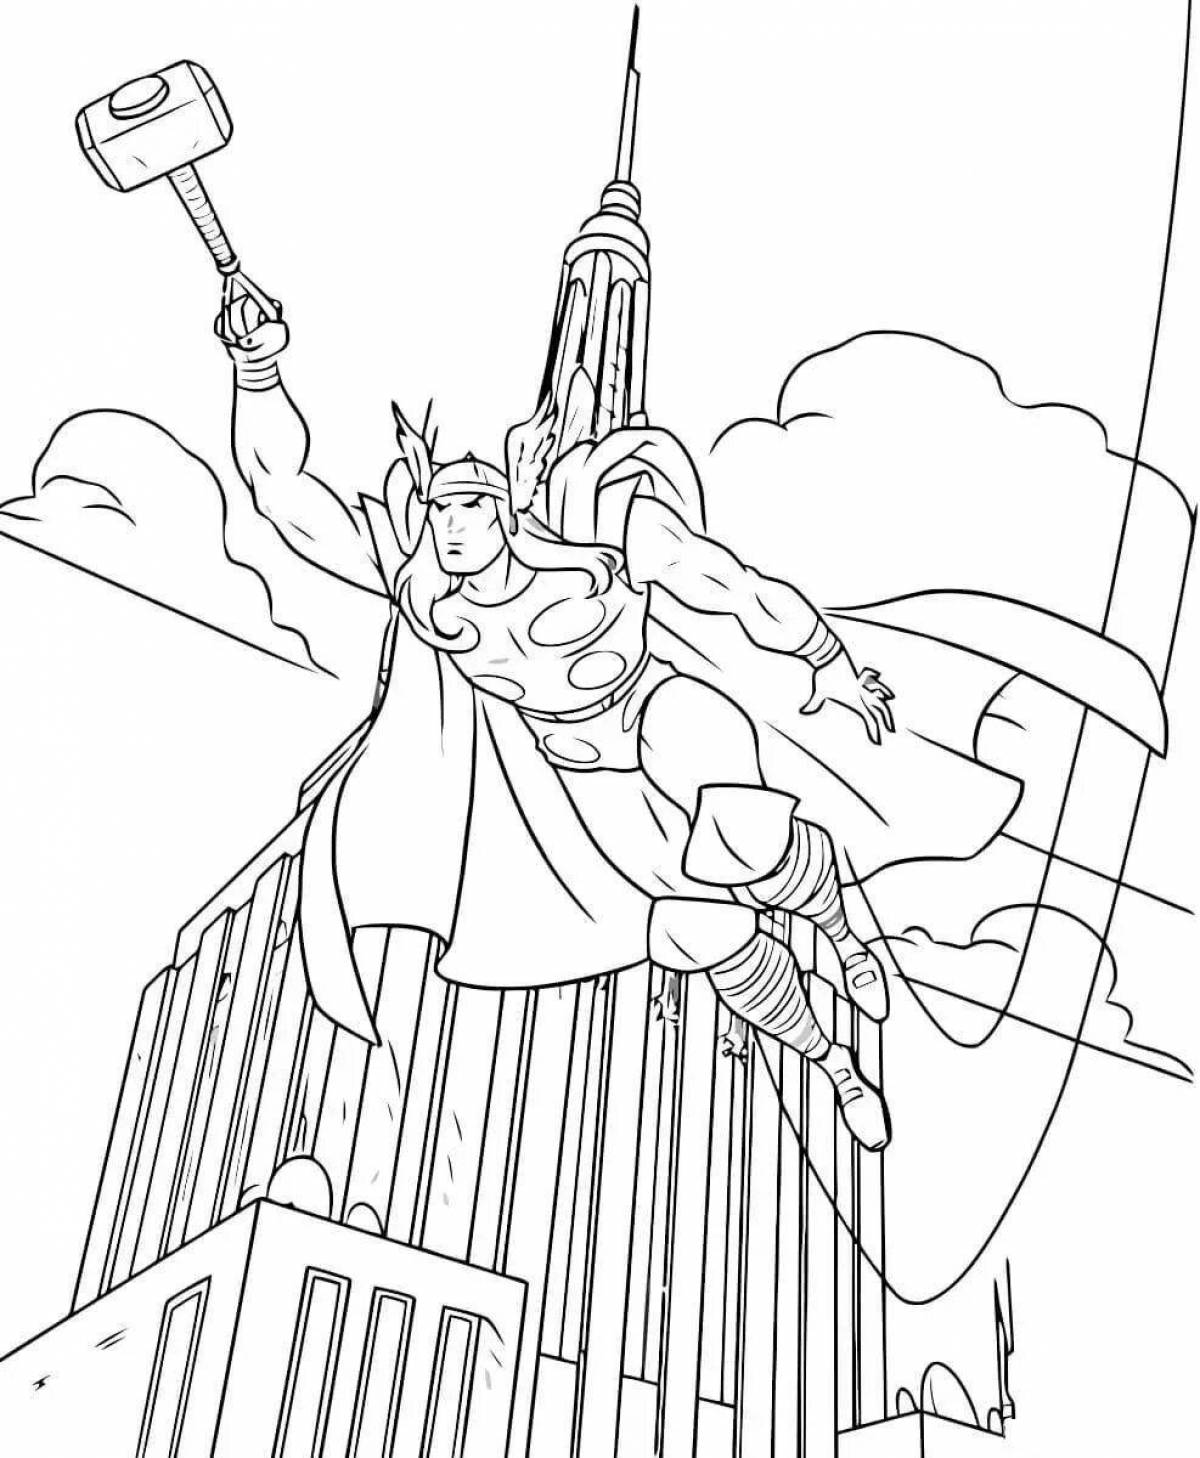 Adorable Thor coloring book for kids